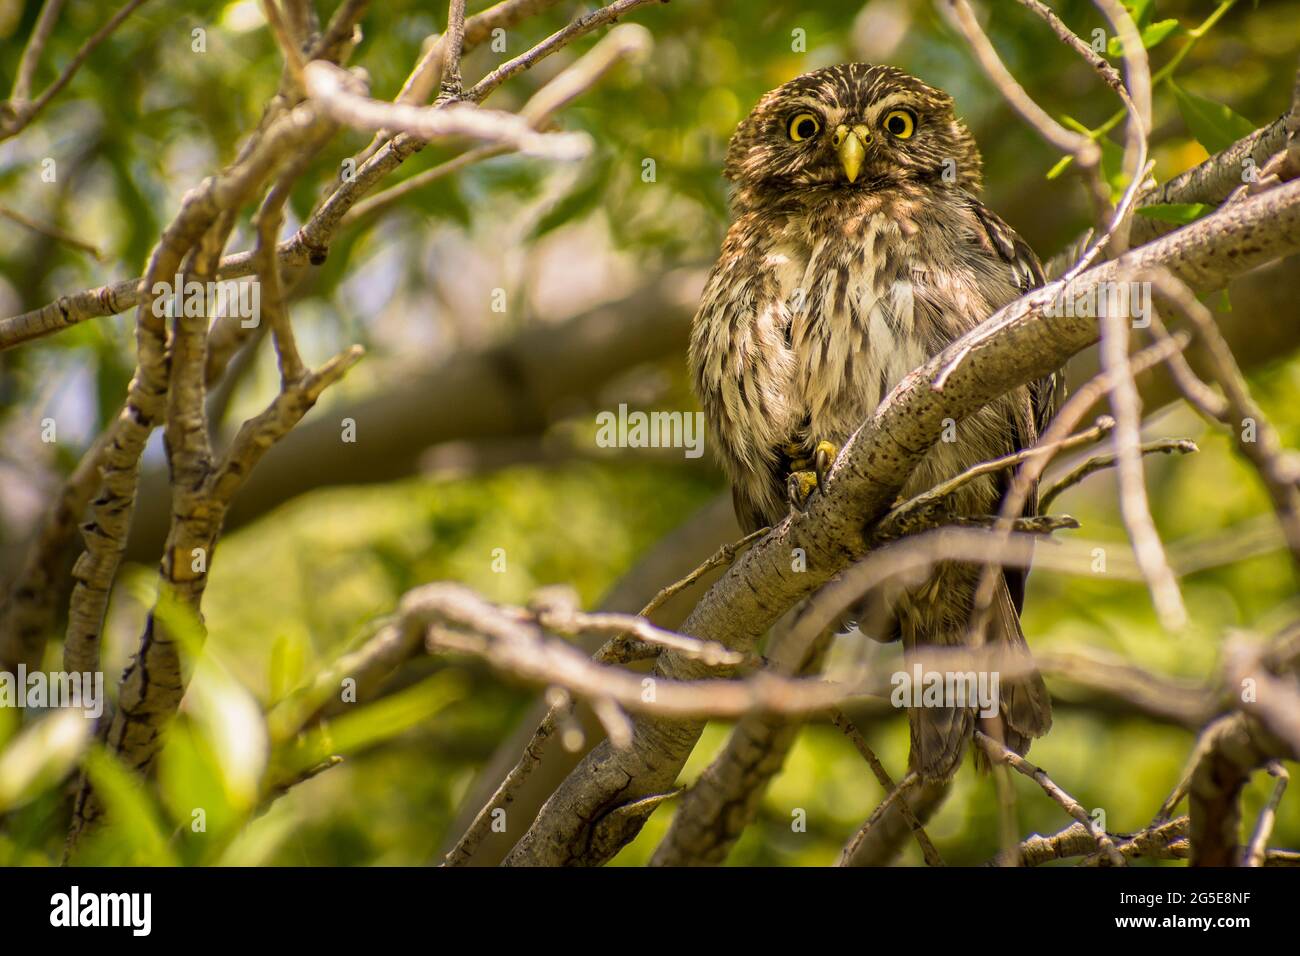 Little owl looking at the camera. Los Alerces National Park, Argentina. Stock Photo